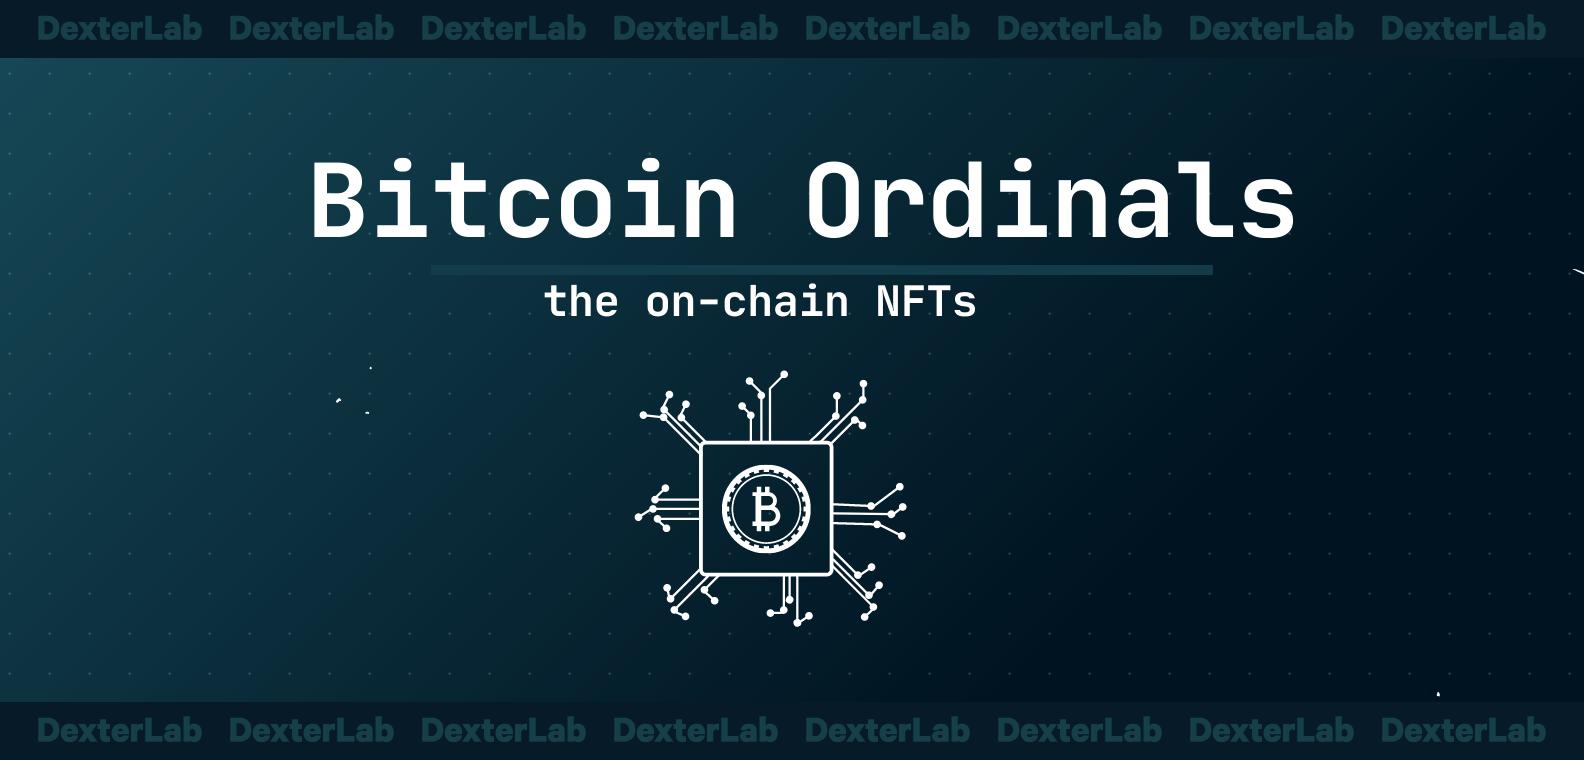 Bitcoin Ordinals: All About the On-Chain NFTs